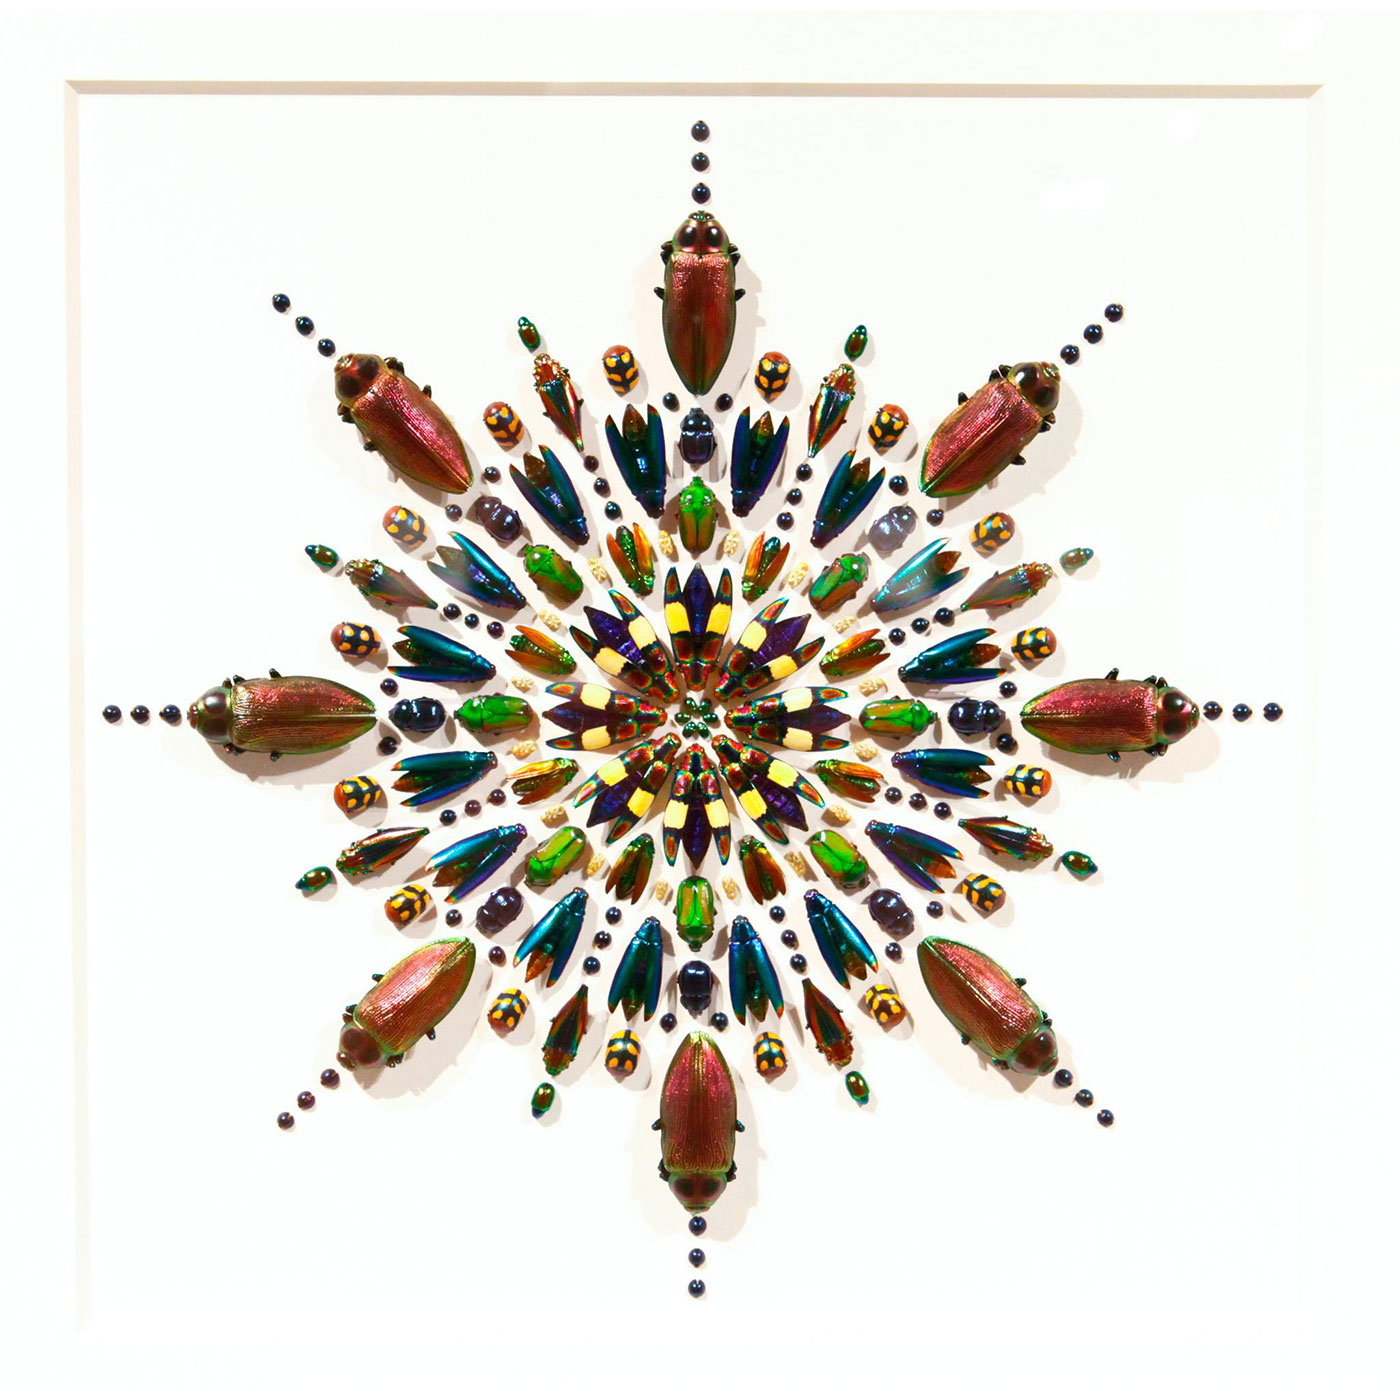 LIMITED EUCHROMA PRISM INSECT STUDY, FRAMED SHADOWBOX - Image 2 of 3